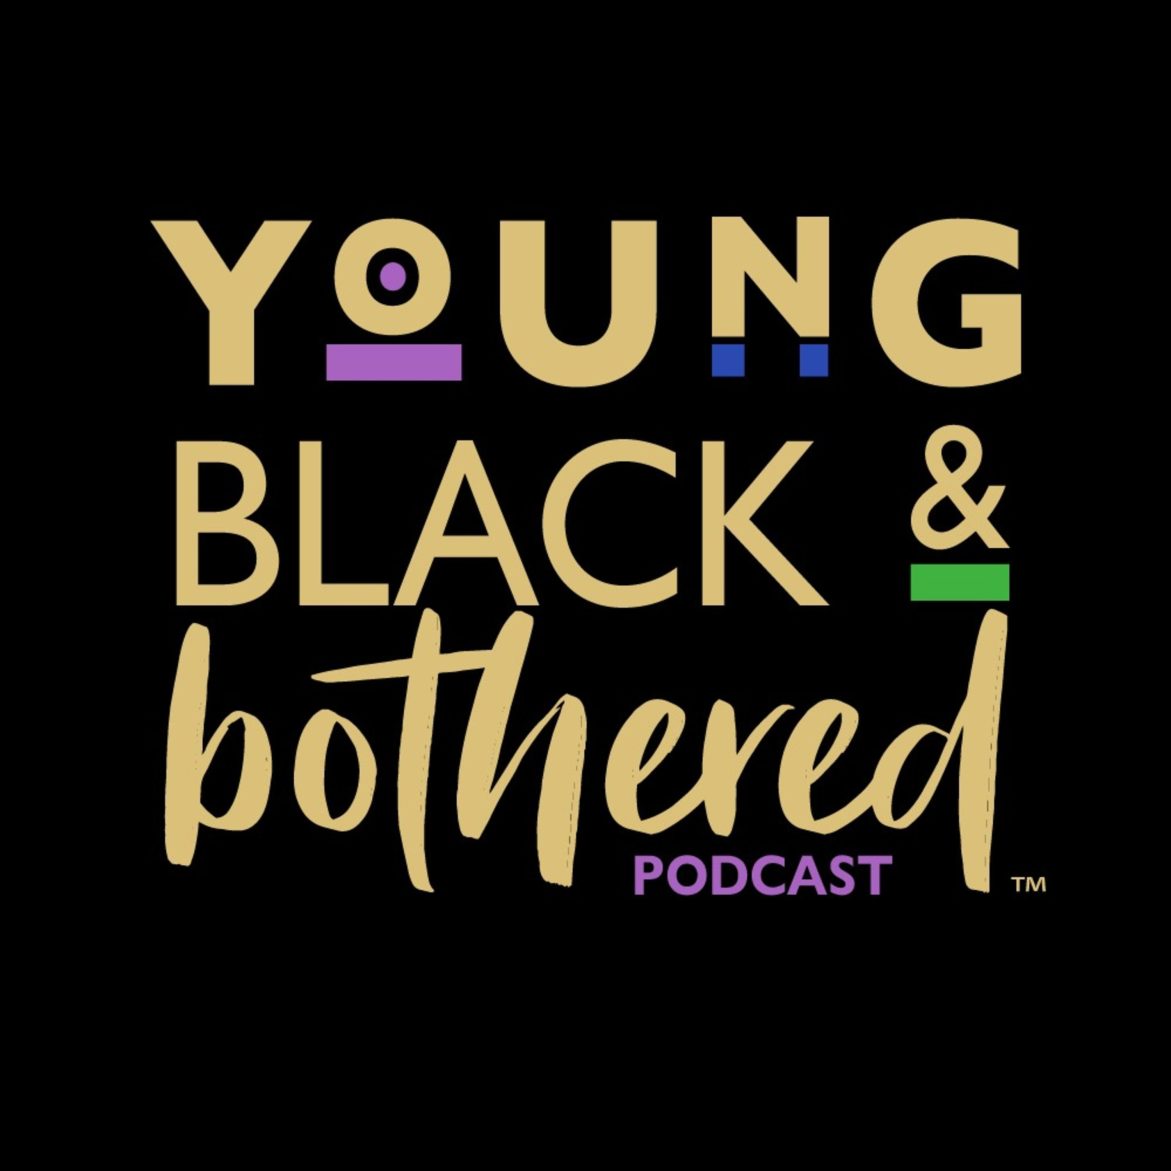 Black Podcasting - 25: First Things First